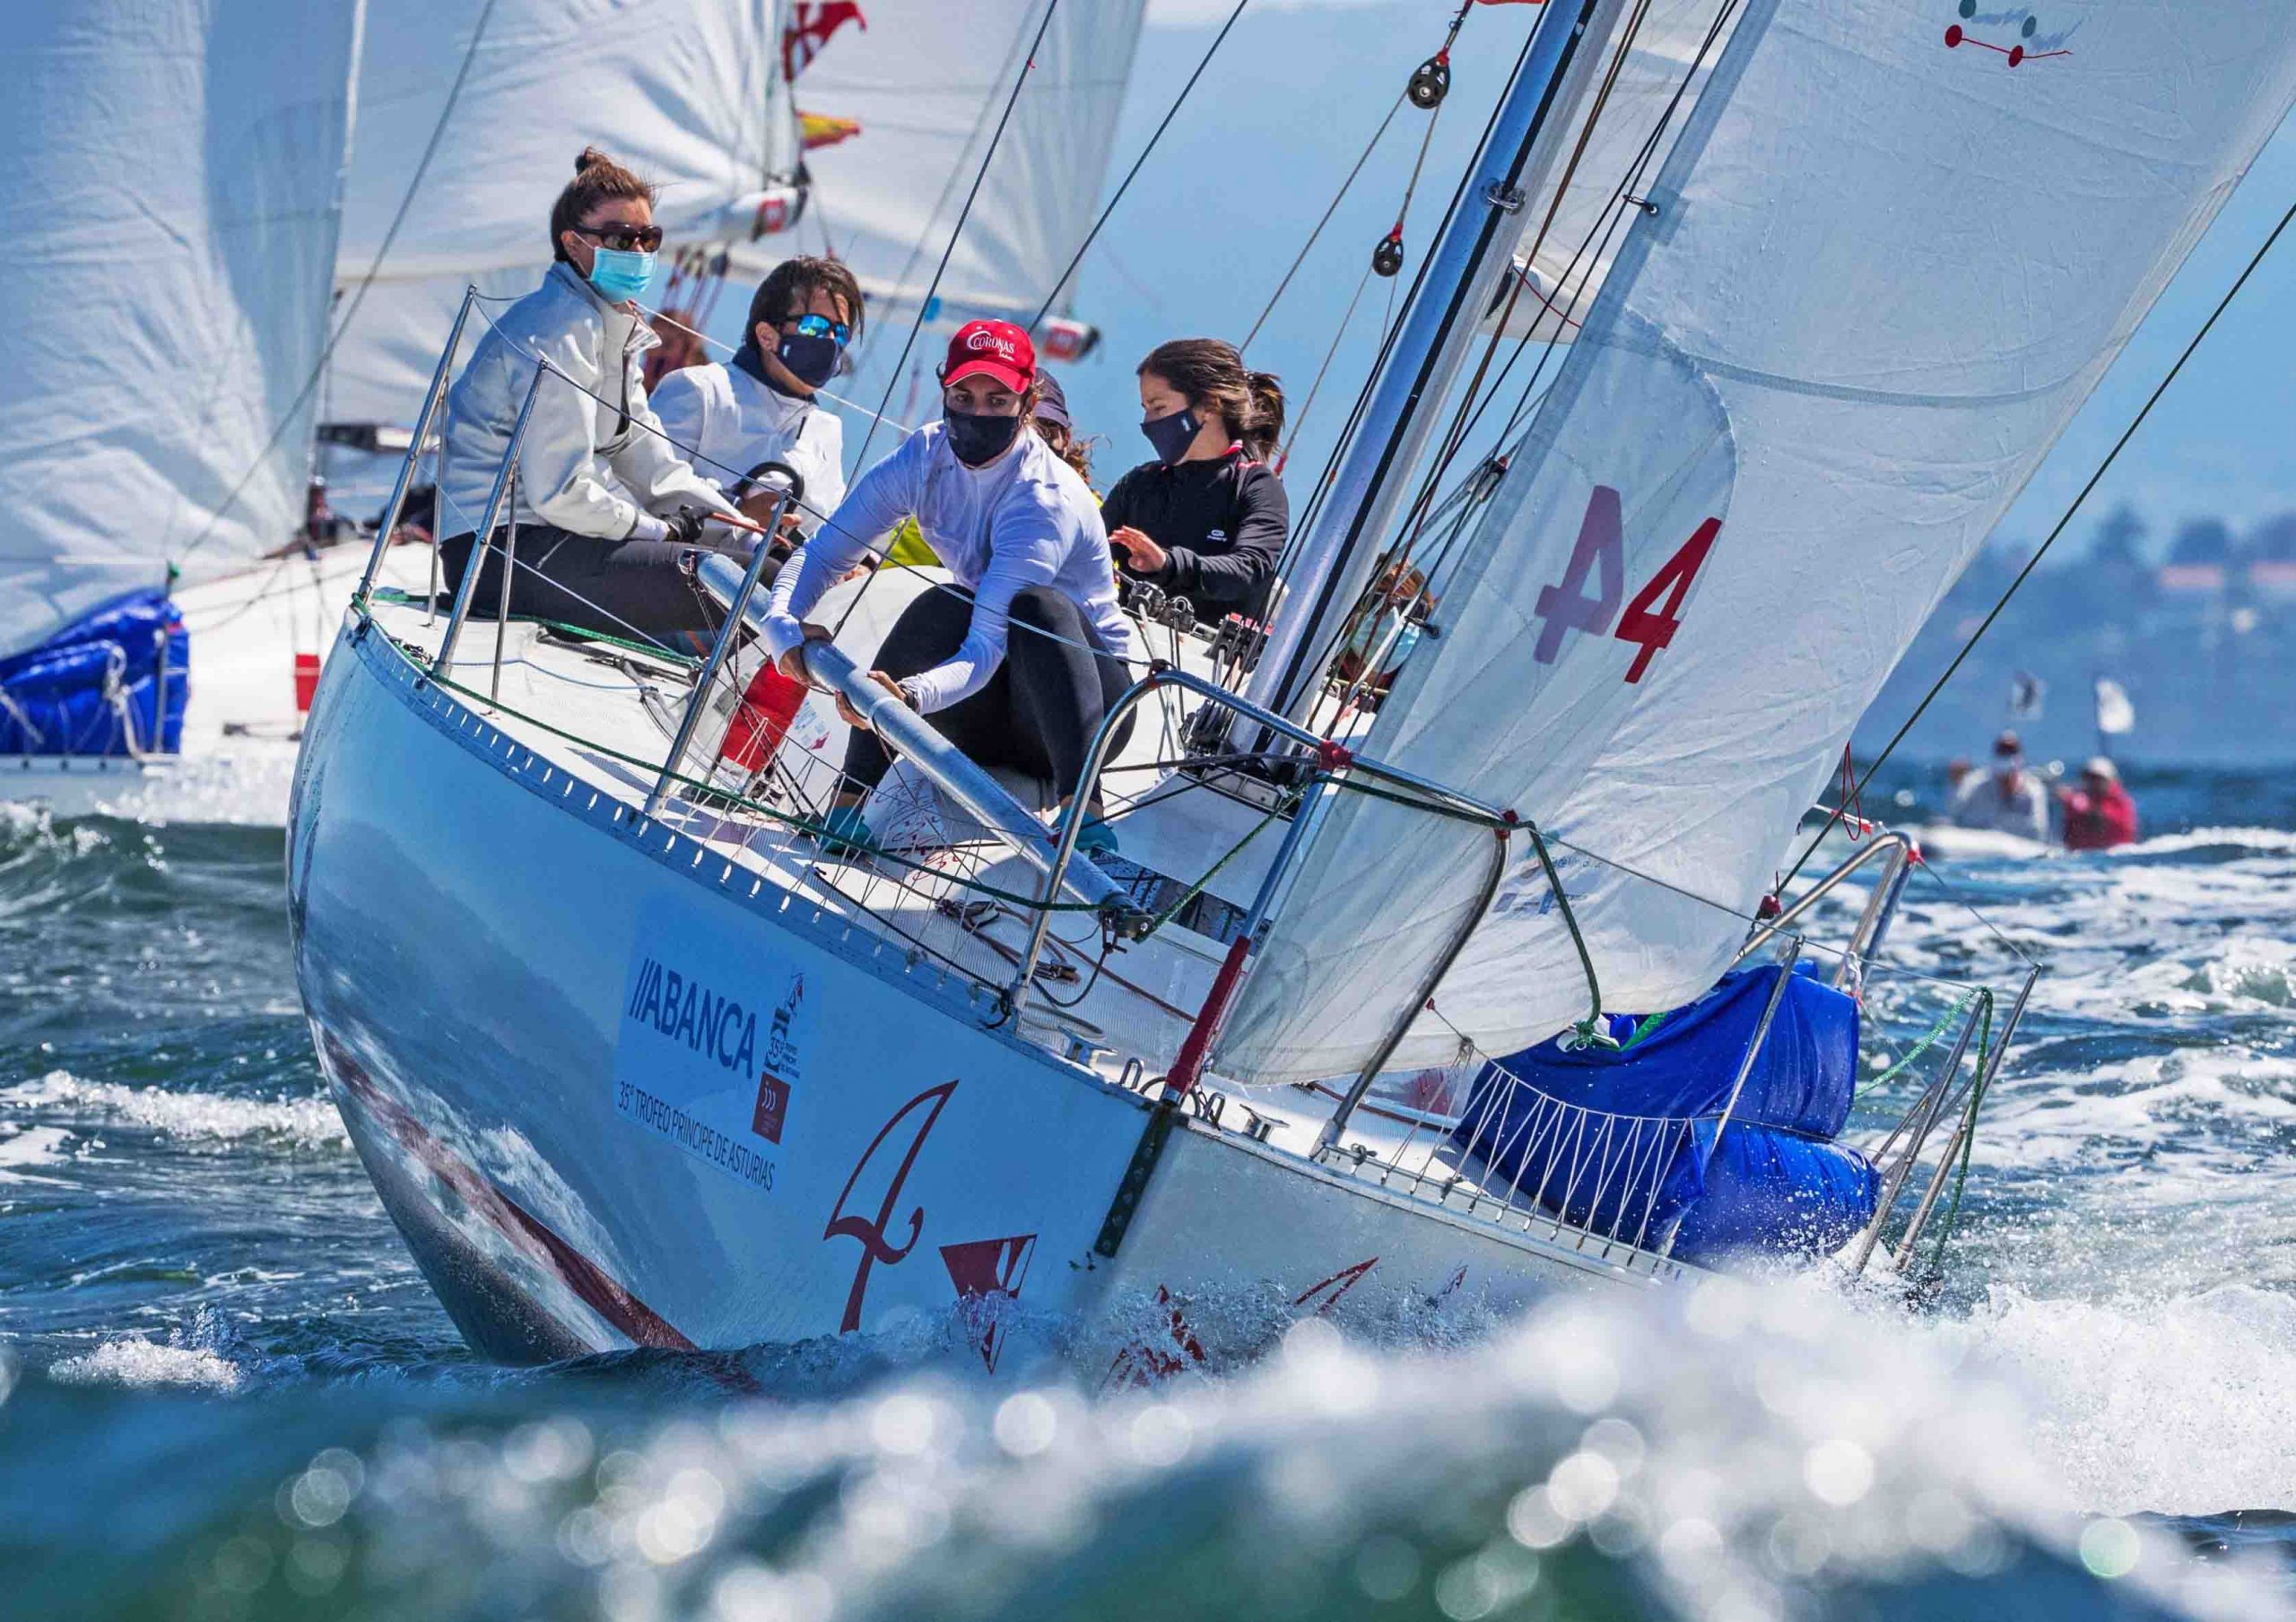 FEATURE: Women with full sail astern